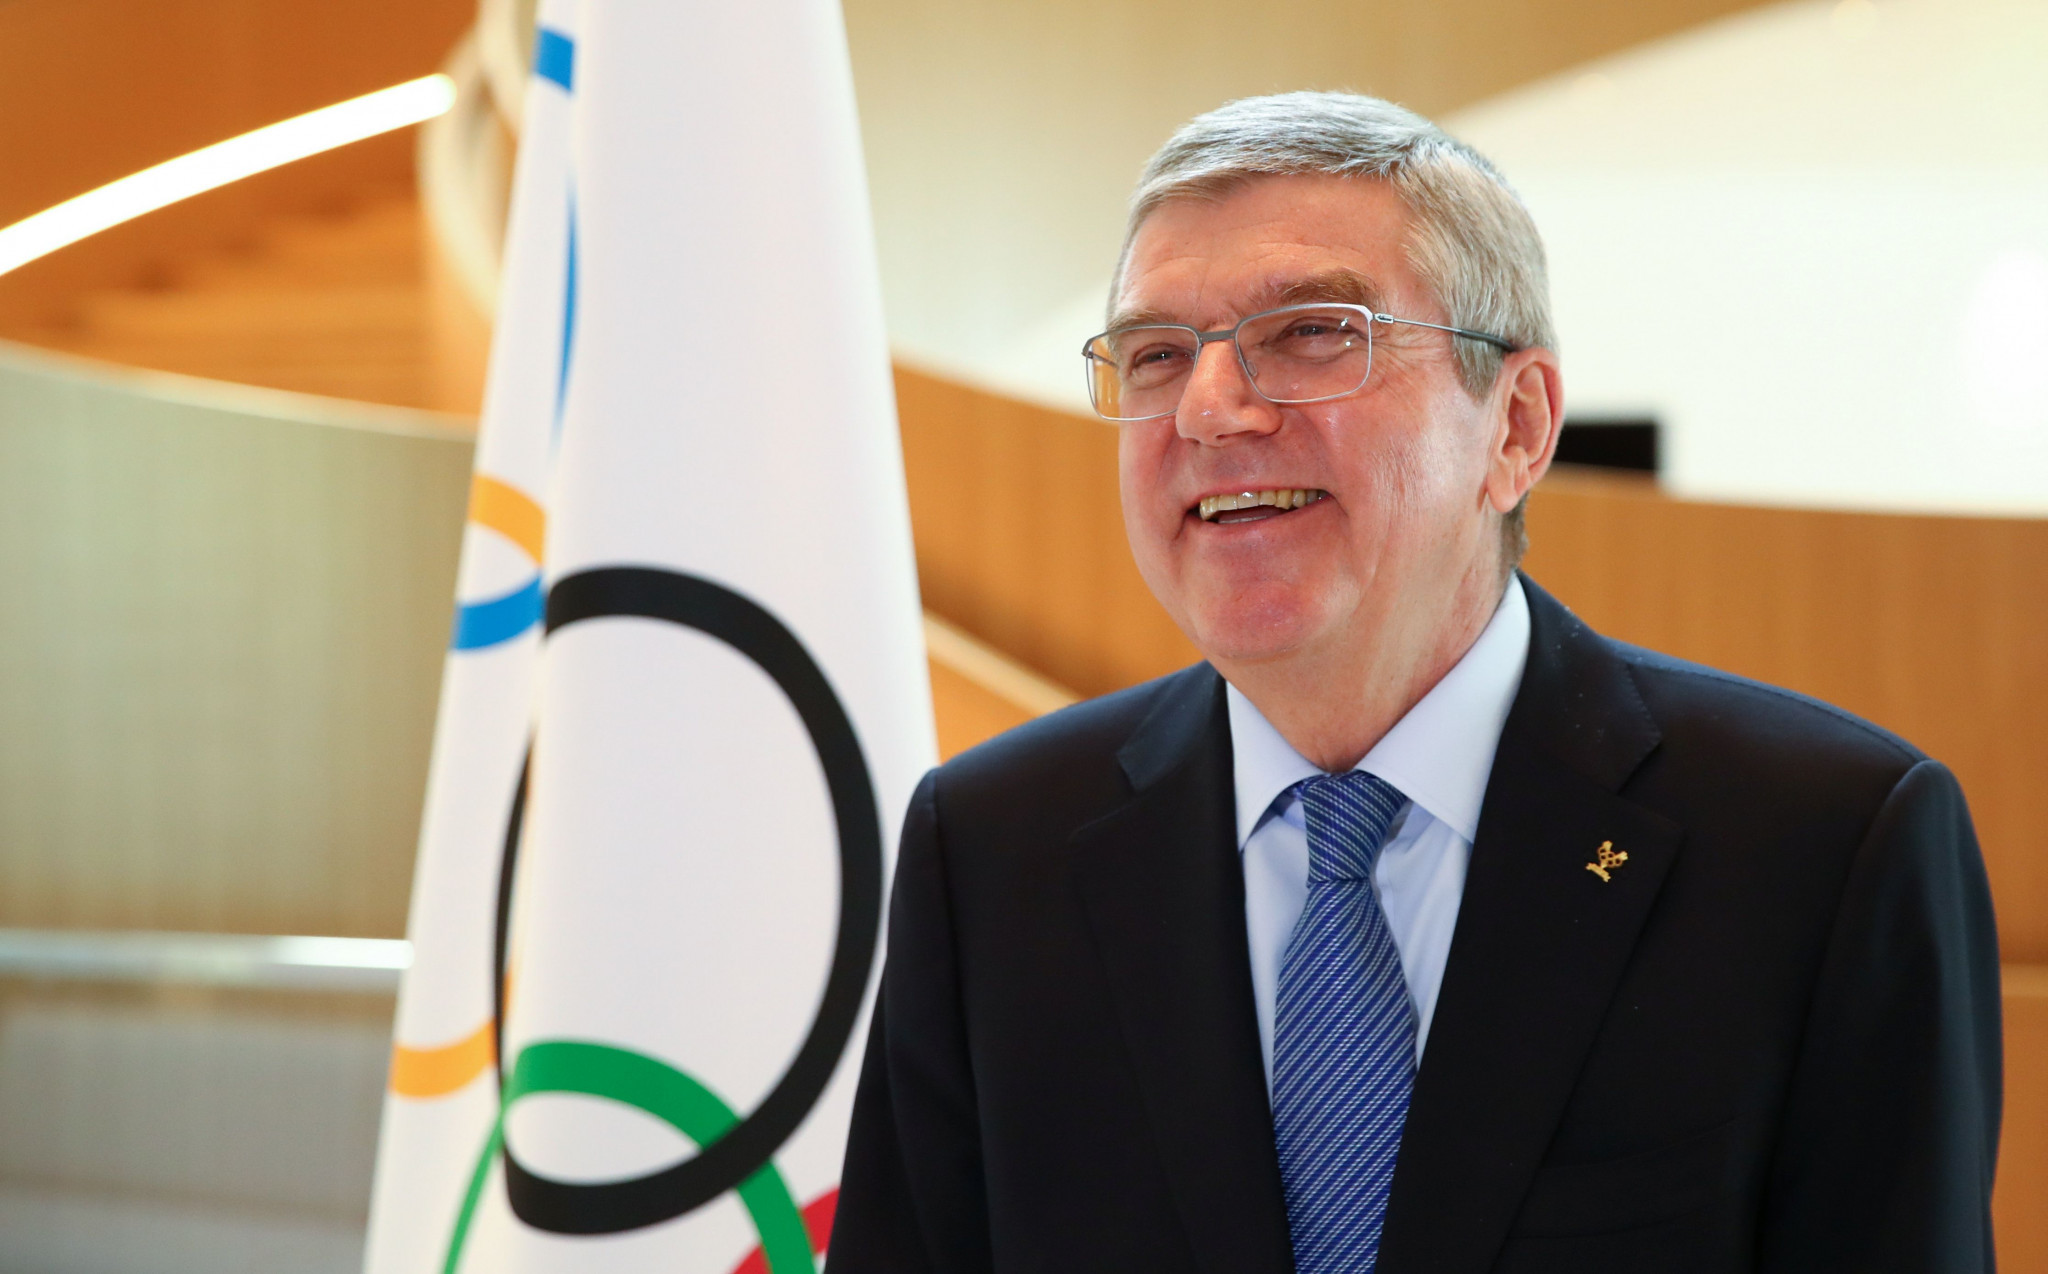 IOC President Thomas Bach recorded a video message to celebrate a "very different" Olympic Day ©Getty Images